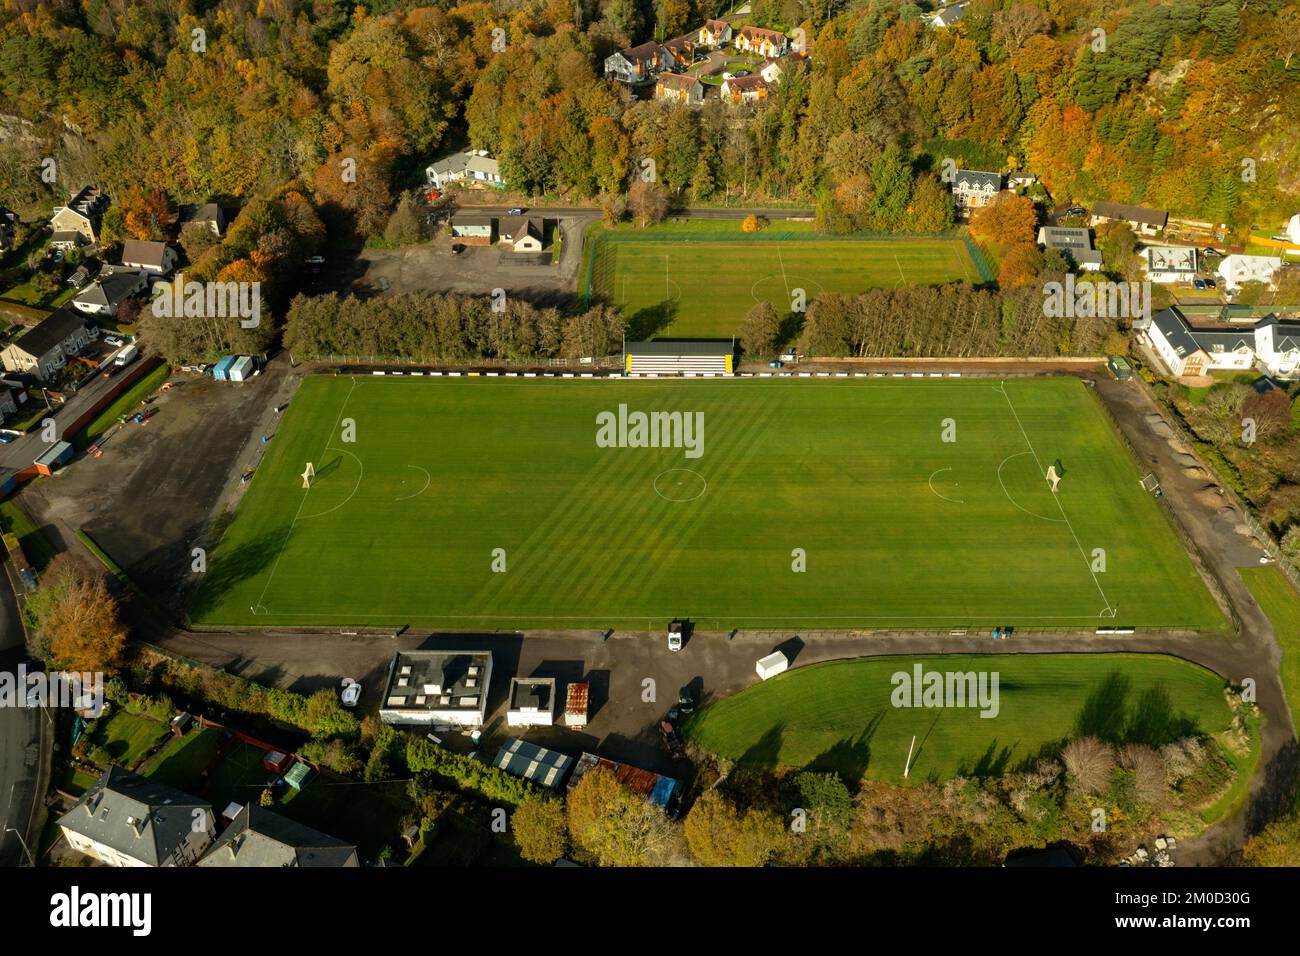 Aerial view of Mossfield Stadium in Oban, Scotland, home of the Oban Camanachd shinty club, and Lochside Rovers shinty club. Stock Photo